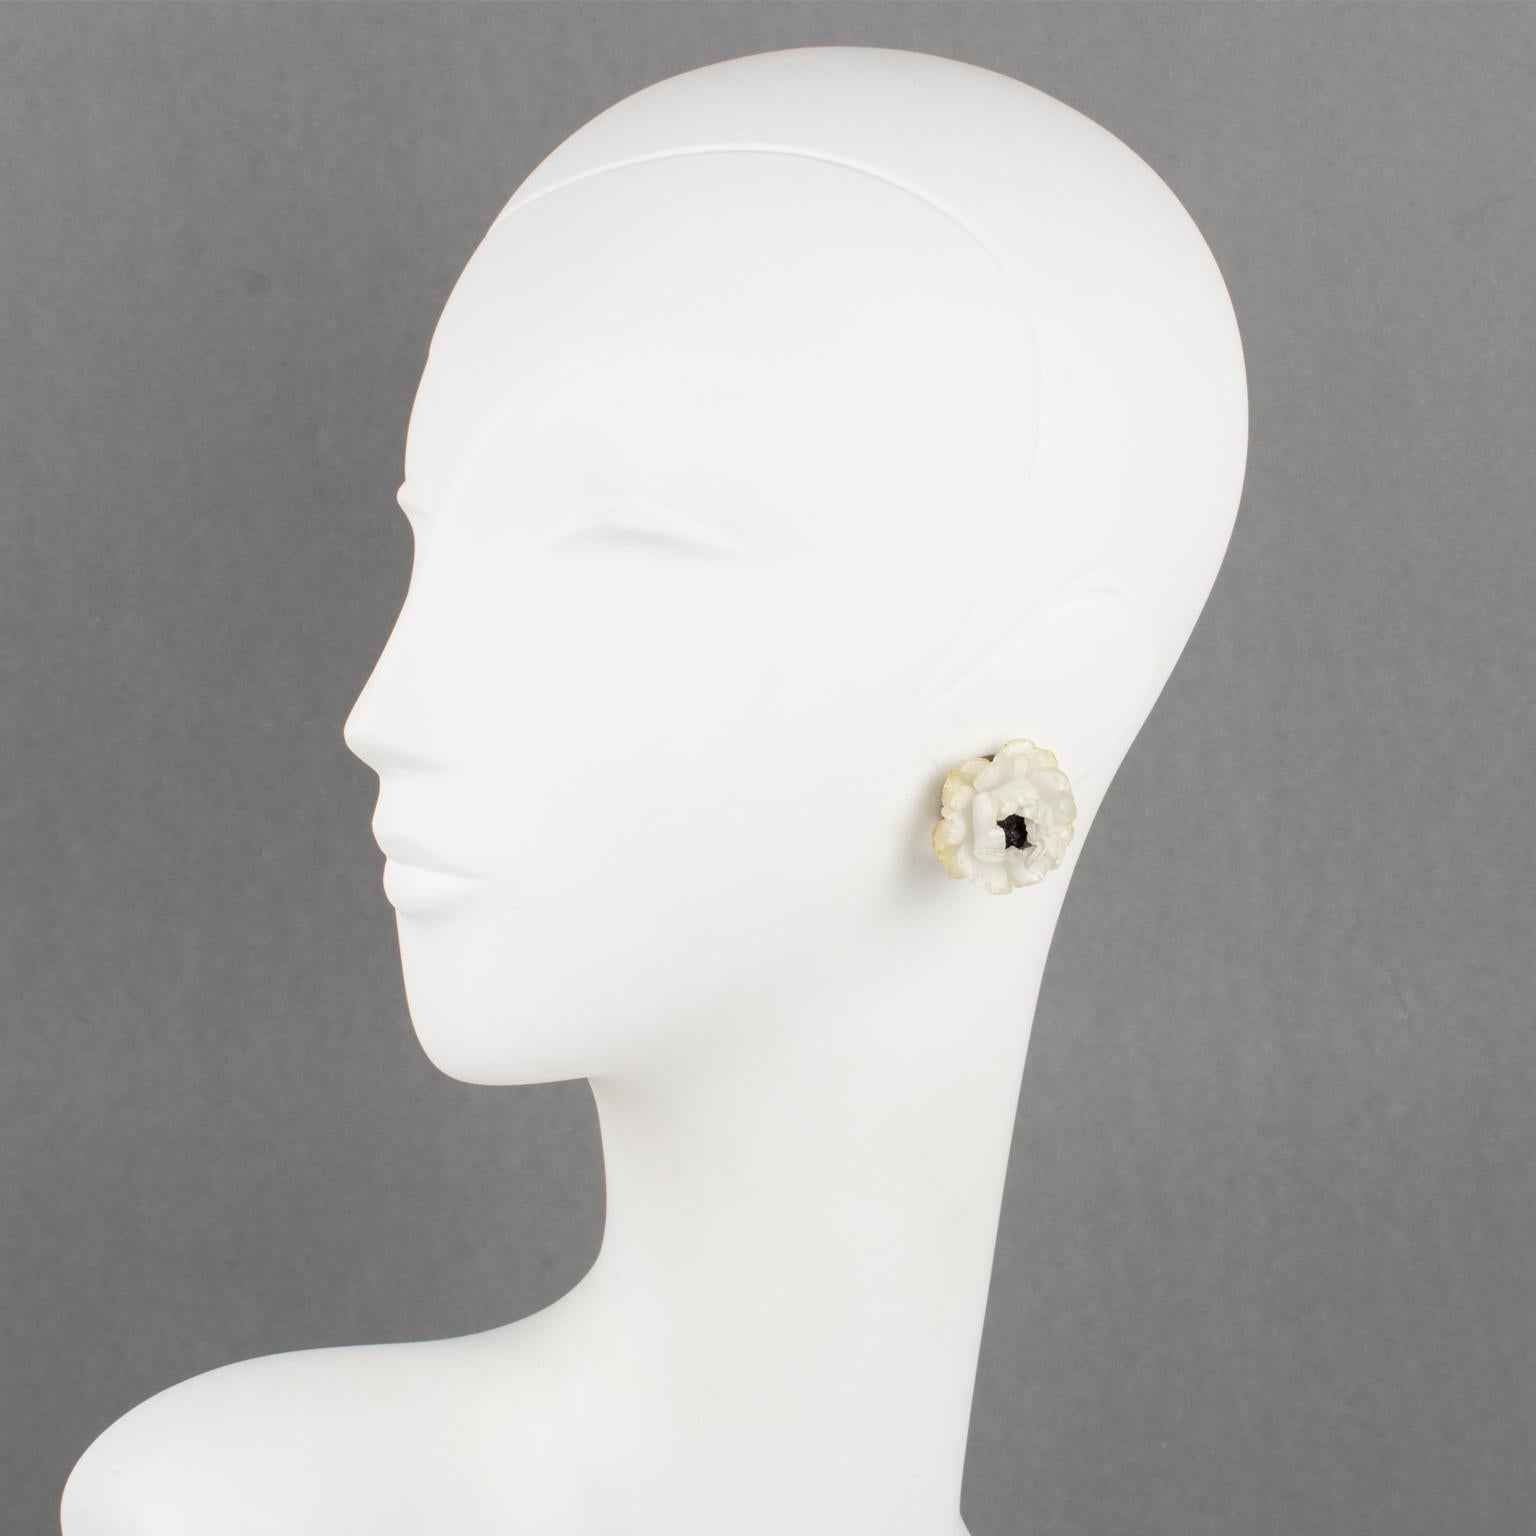 These lovely dimensional clip-on earrings, designed by Cilea Paris, feature a floral-inspired hand-made artisanal resin composition in a rose flower with a textured heart. A classic off-white color with light yellow overtone edges contrasted with a